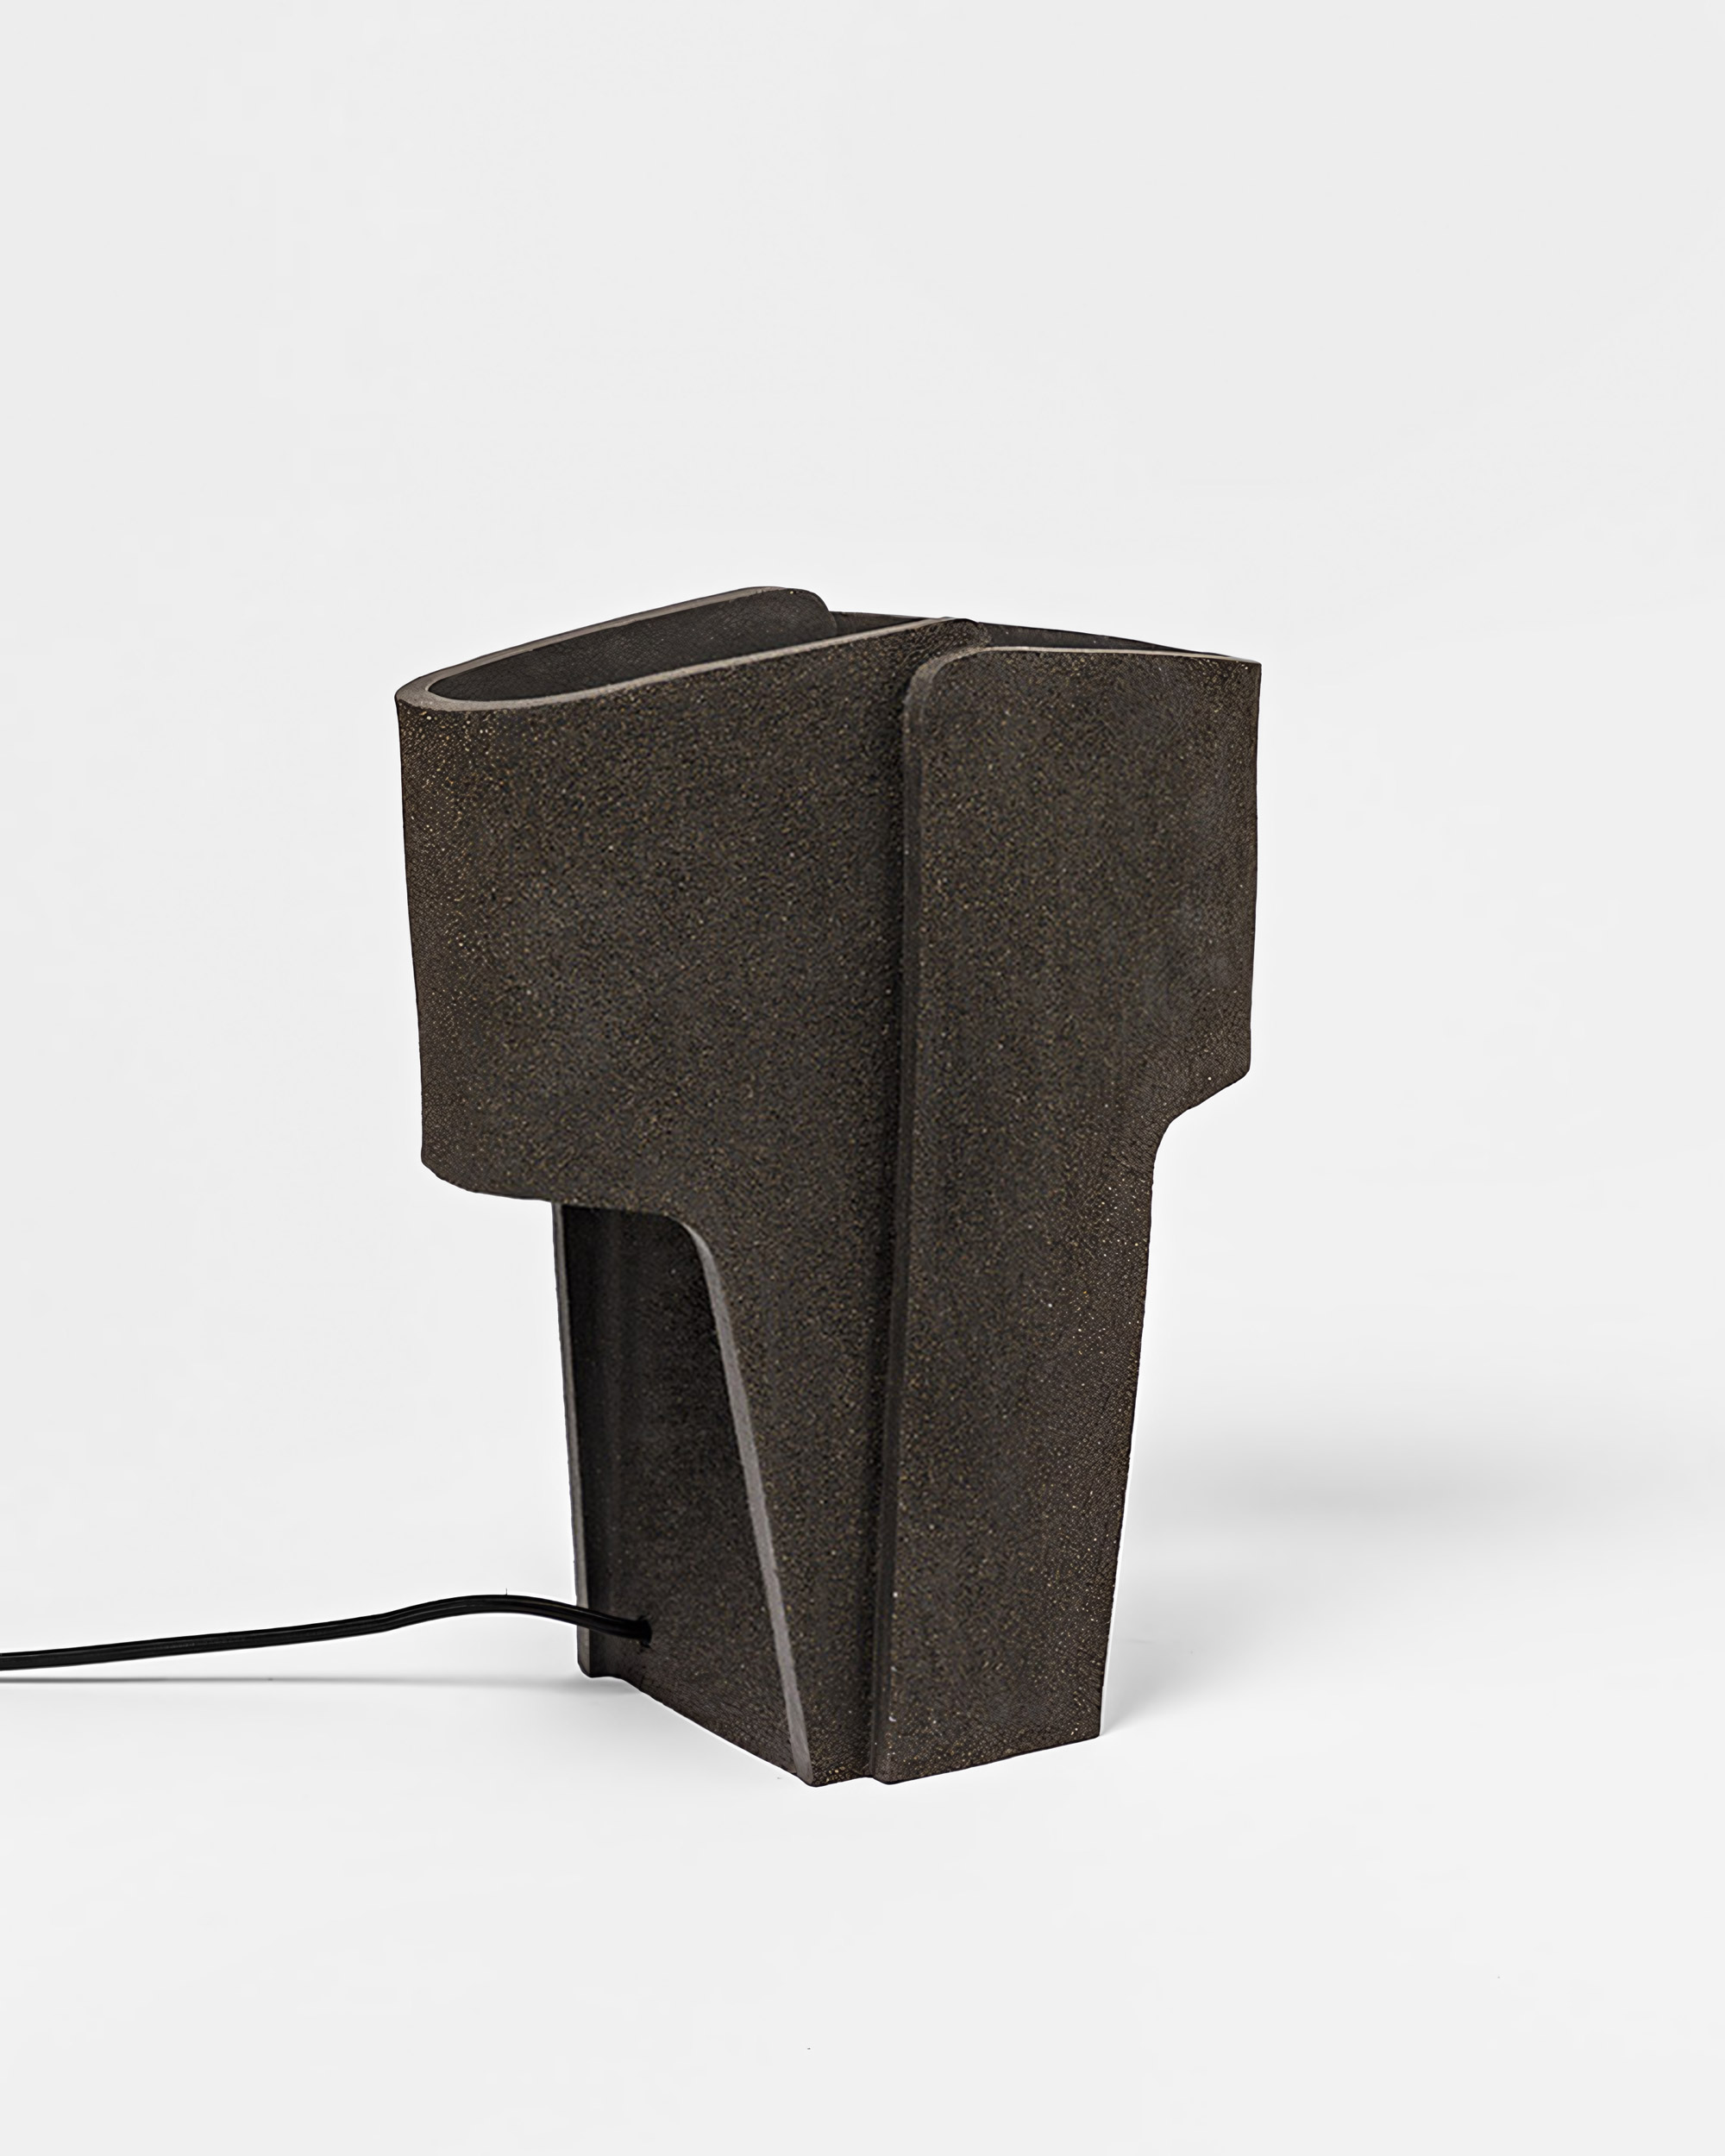 Nocta Table Lamp by Denis Castaing